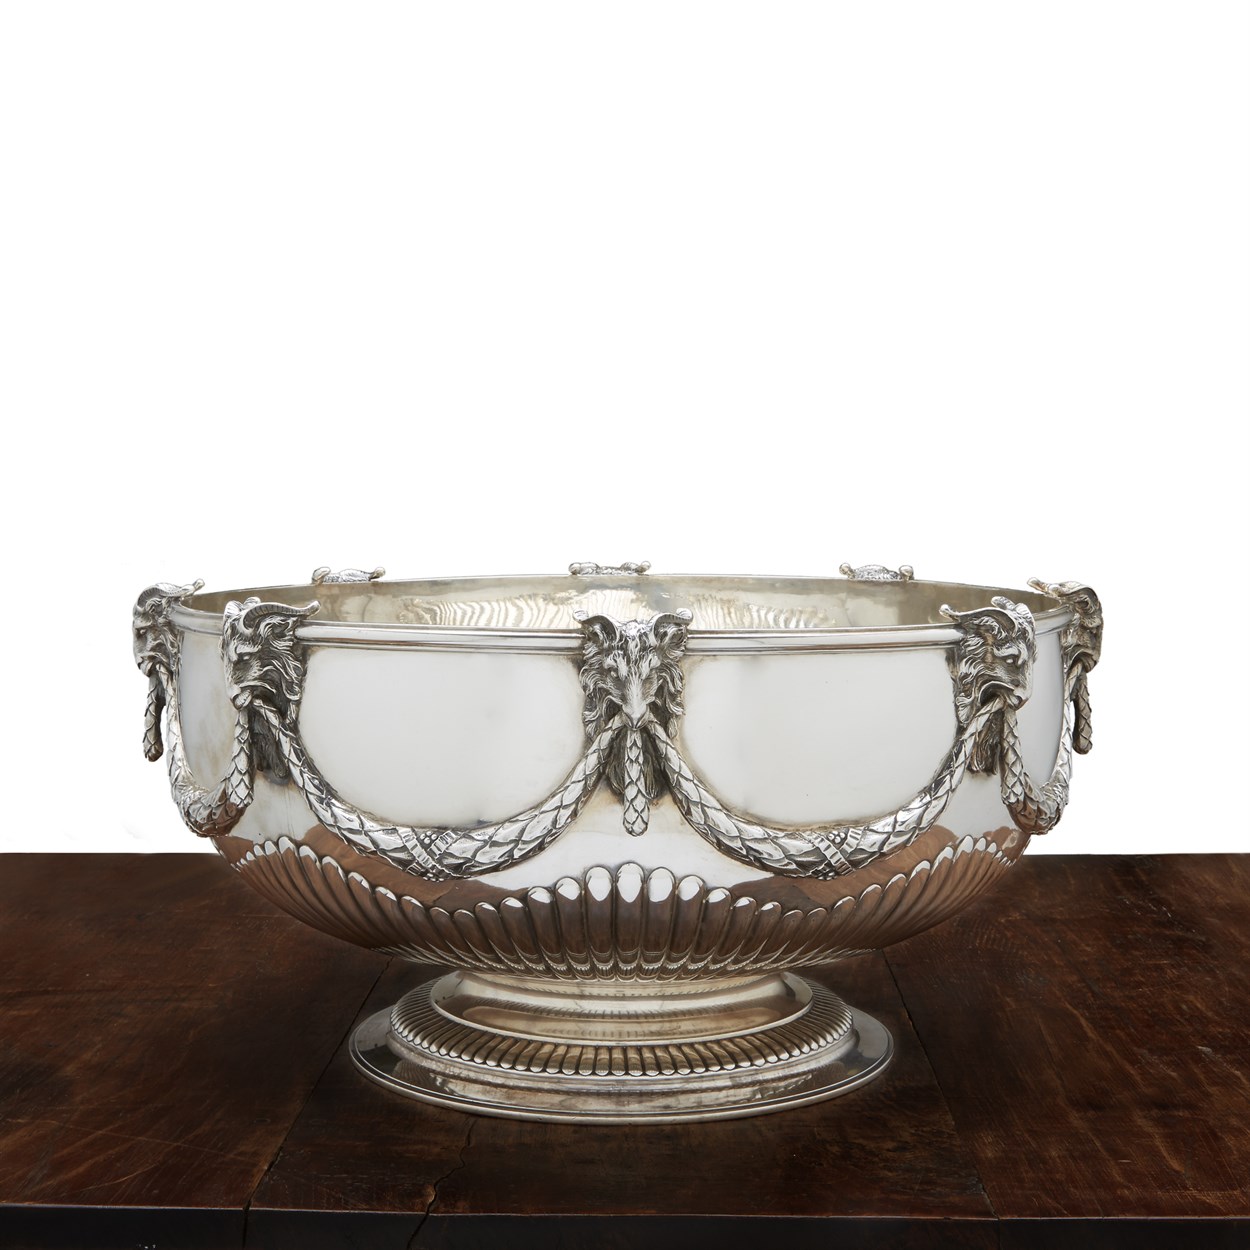 Lot 65 - A large and impressive Victorian sterling silver punch bowl